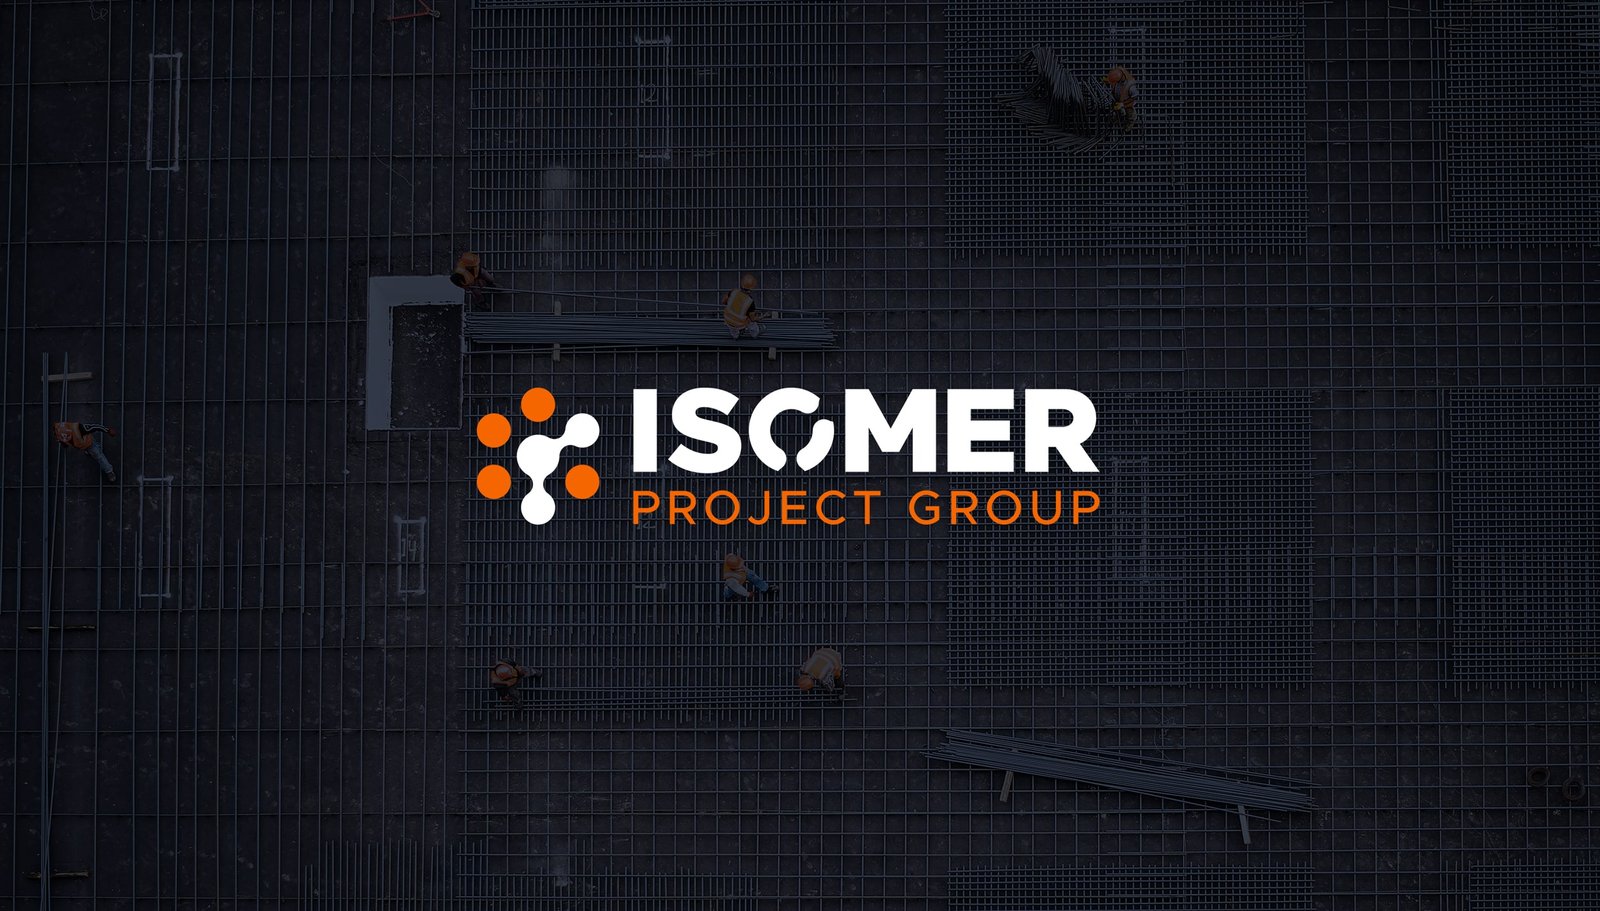 ISOMER PROJECT GROUP